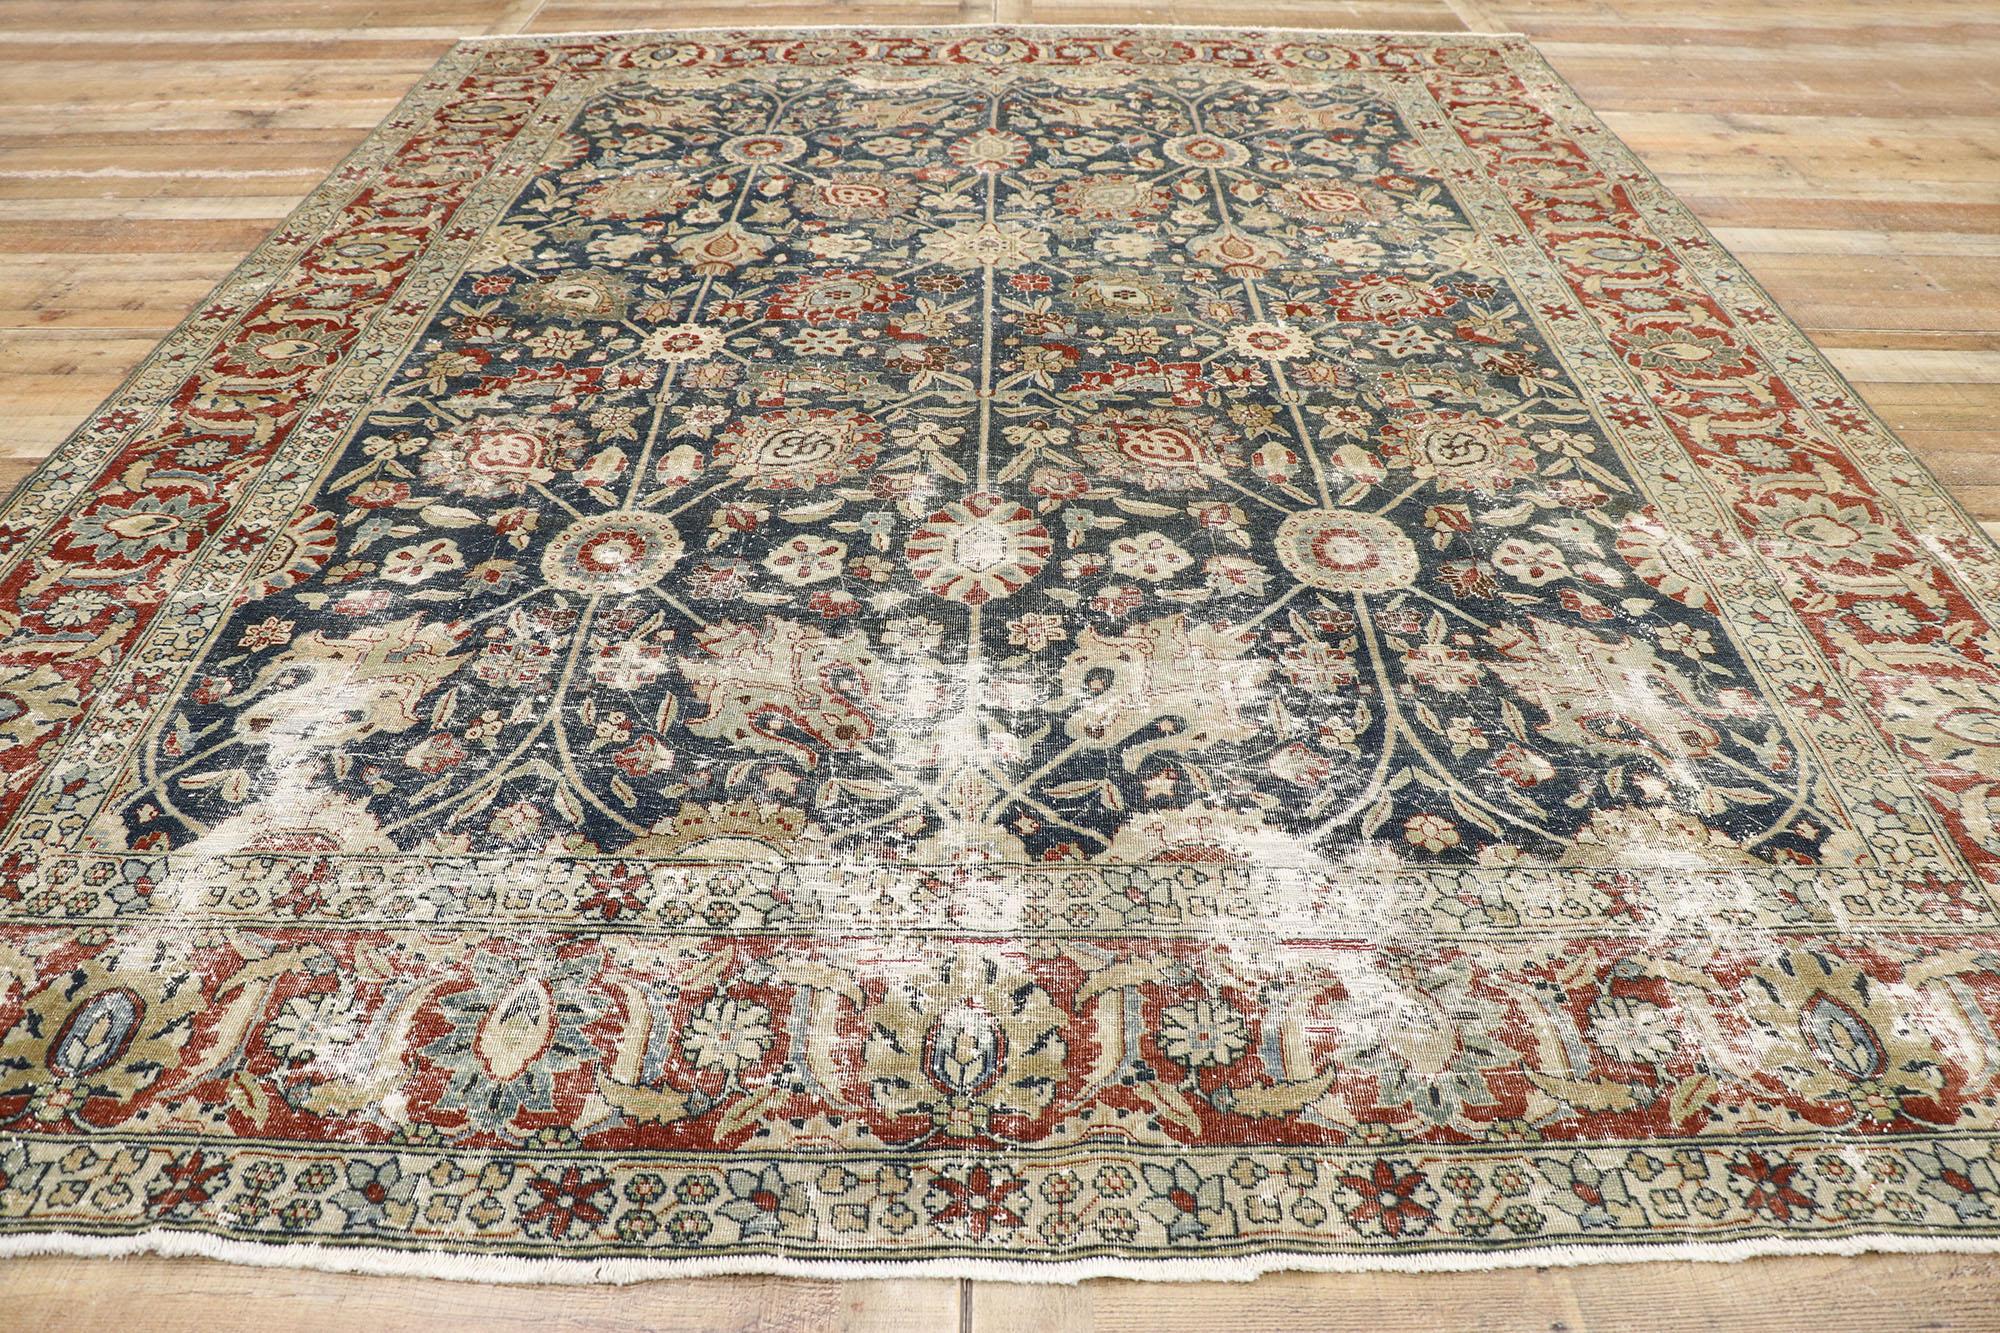 Distressed Antique Persian Tabriz Rug with Rustic Old World English Style For Sale 1